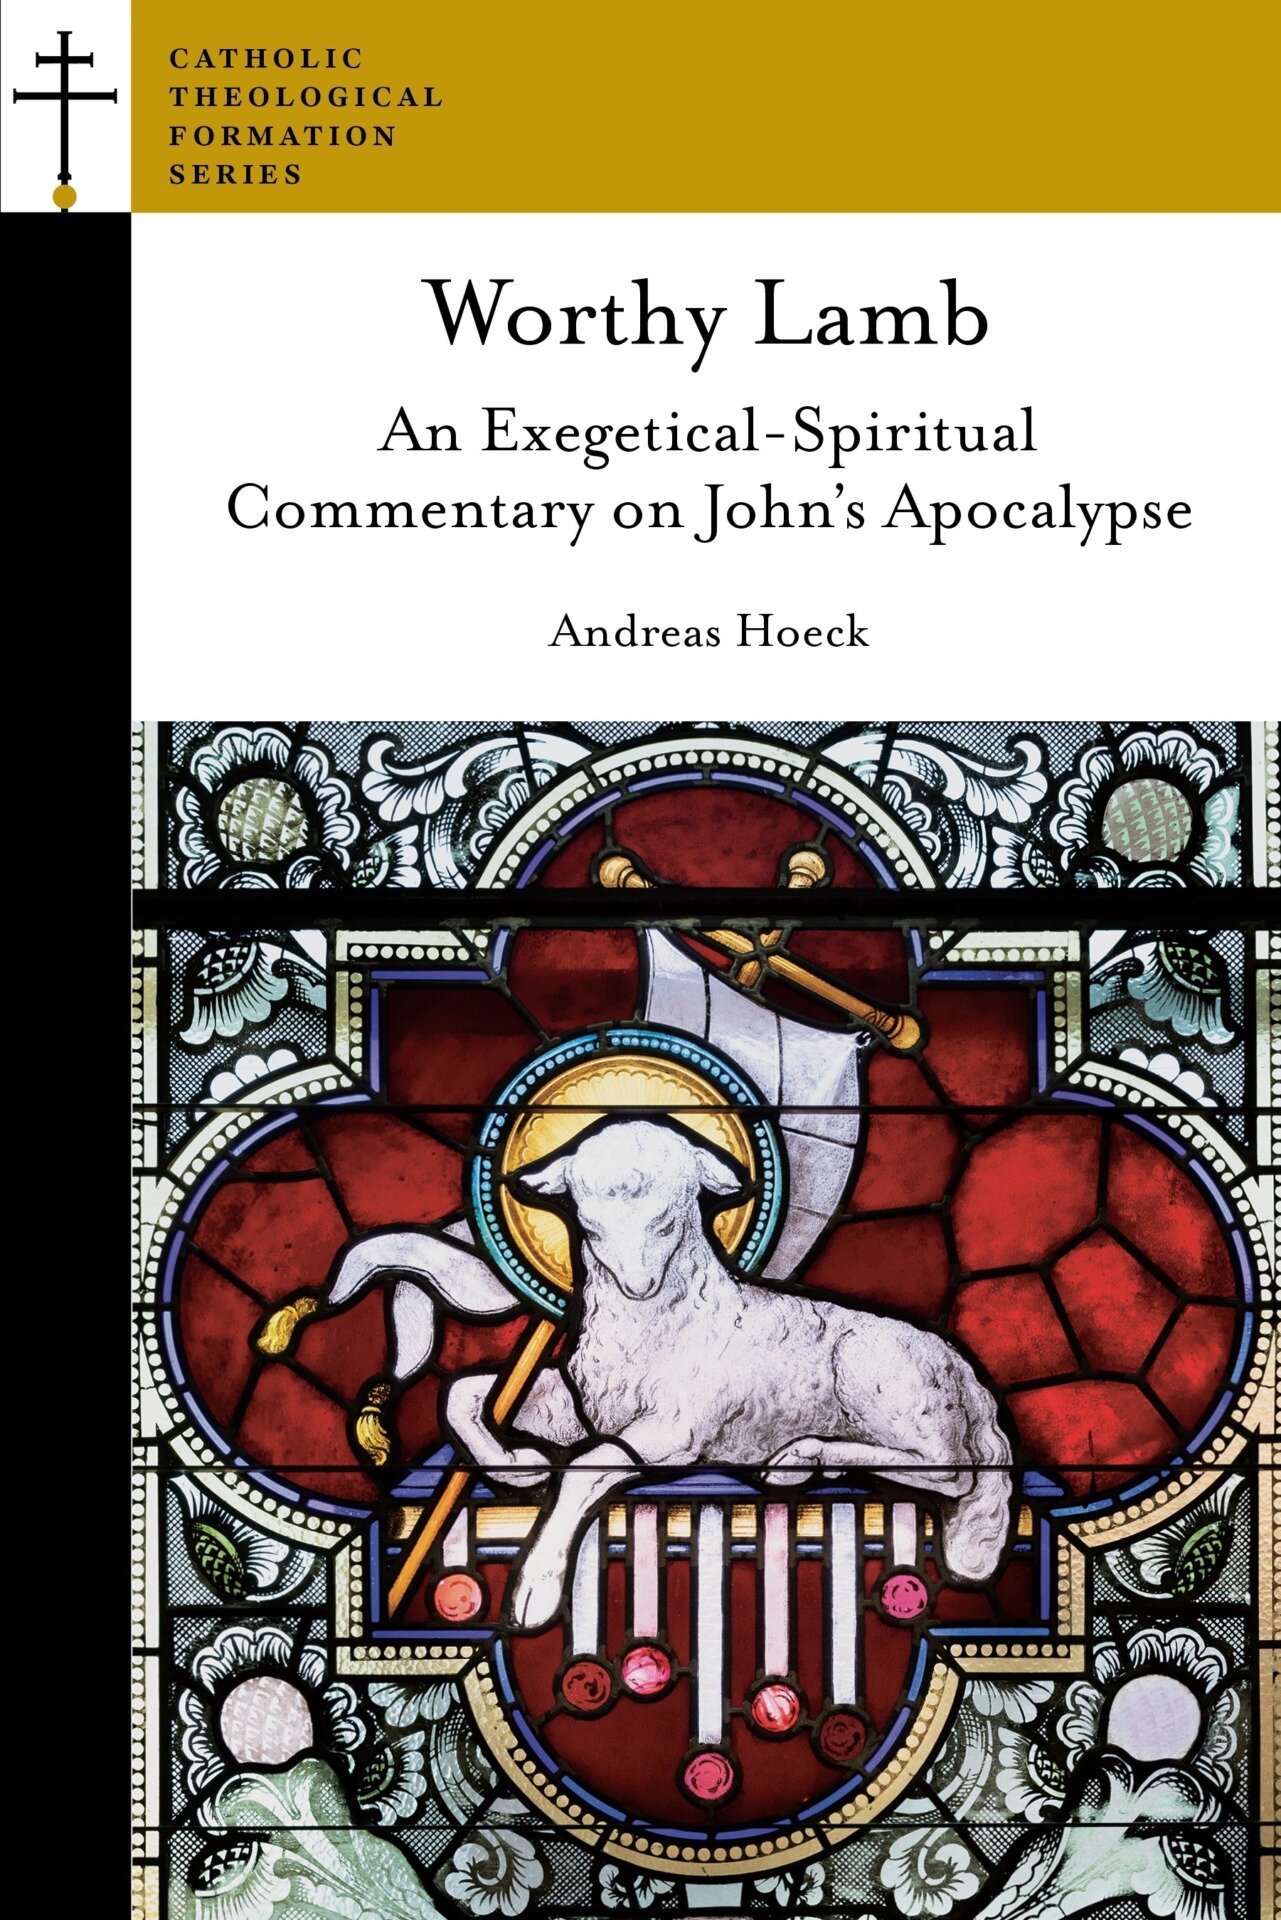 Worthy Lamb: An Exegetical-Spiritual Commentary on John’s Apocalypse (Catholic Theological Formation Series)